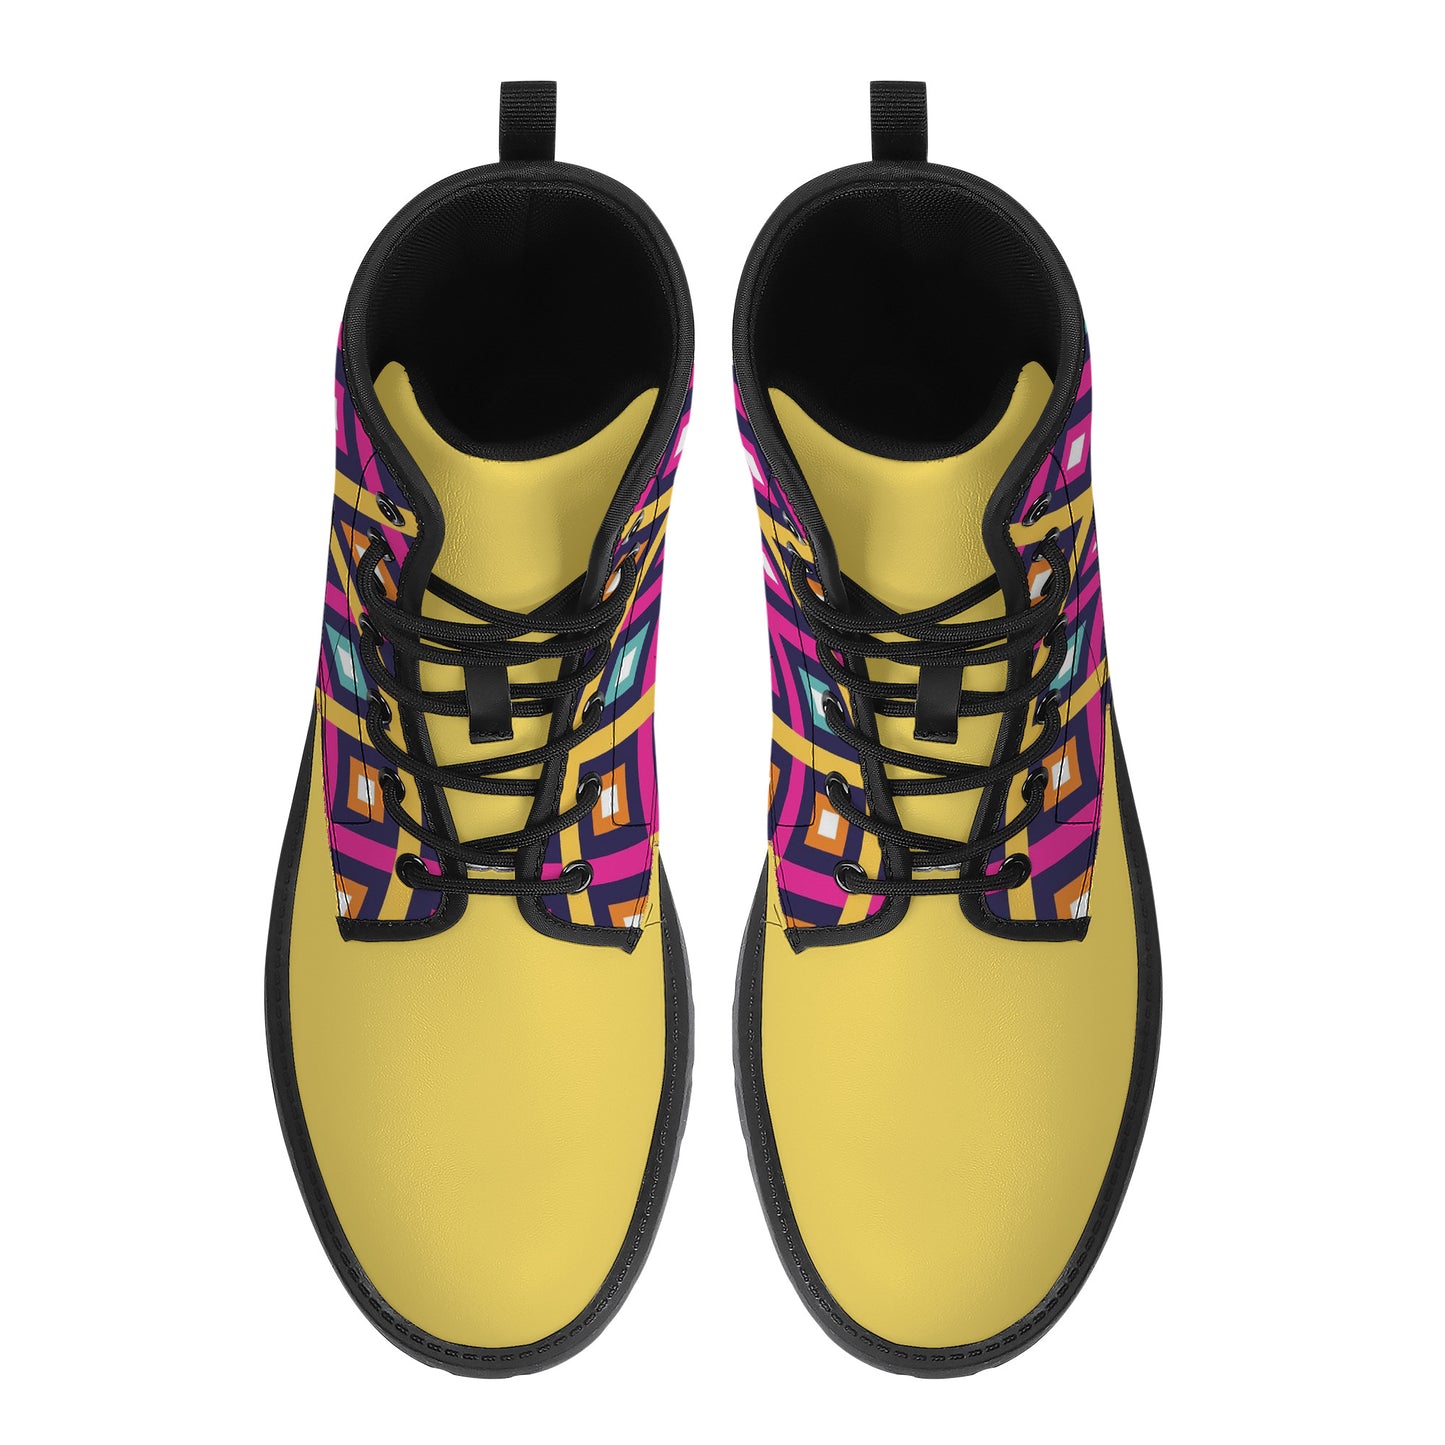 Unisex Synthetic Leather Boots - Geometric